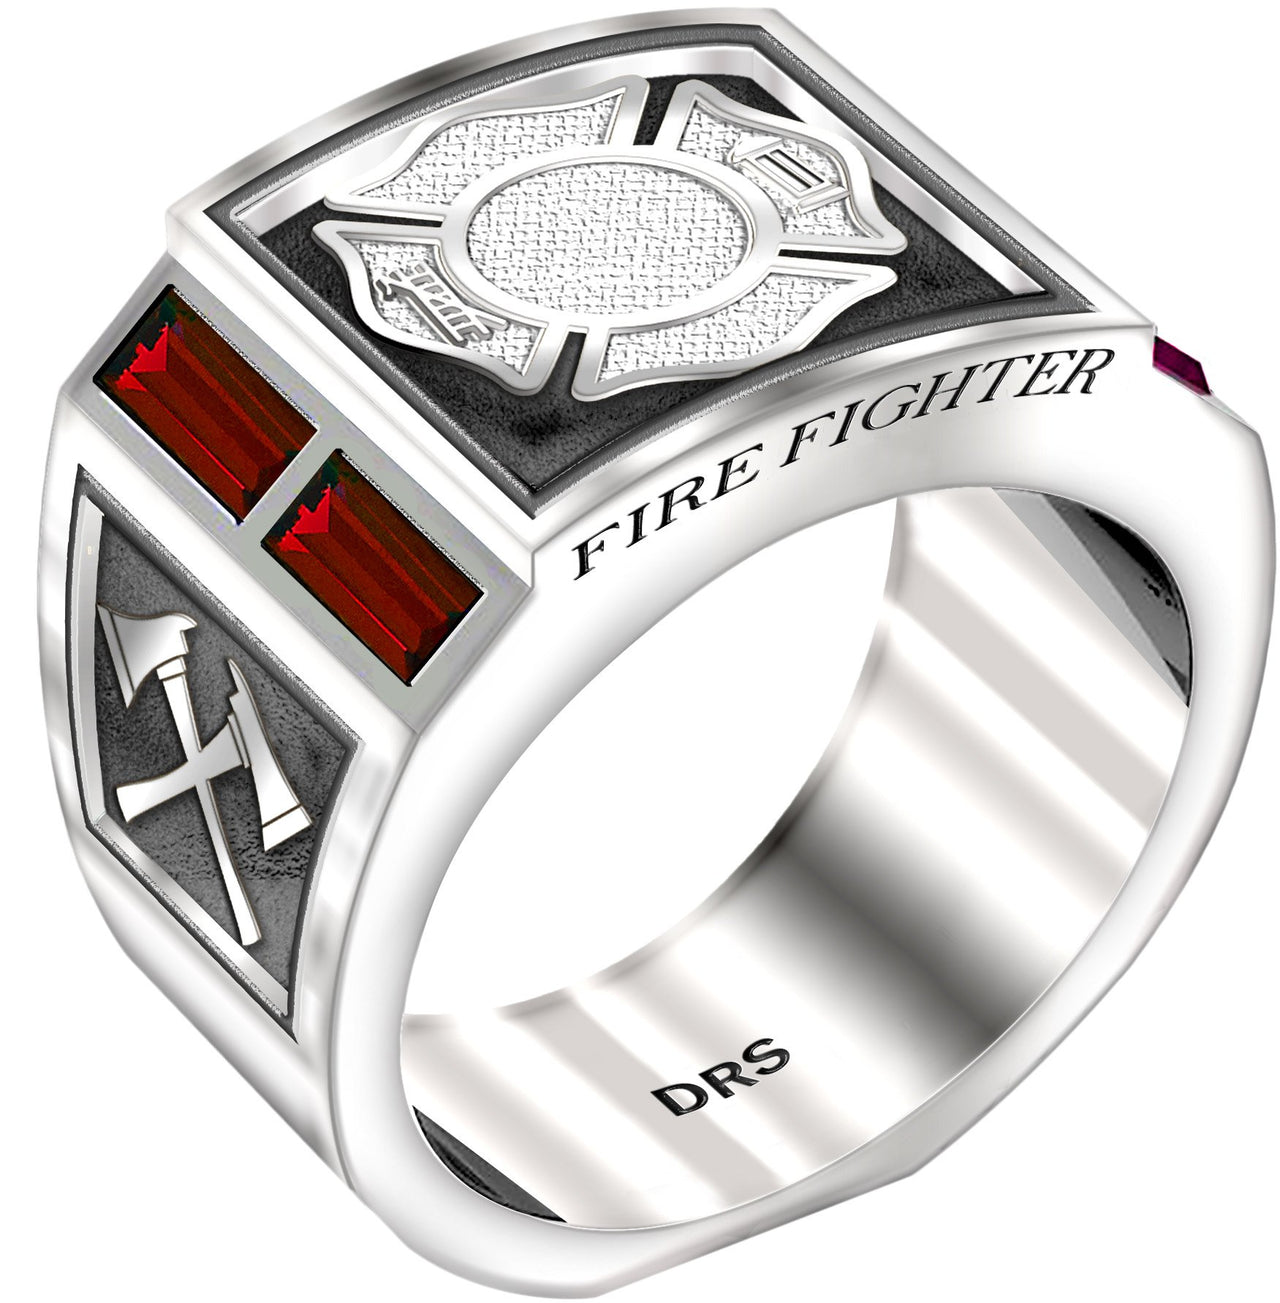 Sterling Silver Ring - Fire Fighter Ring For Men